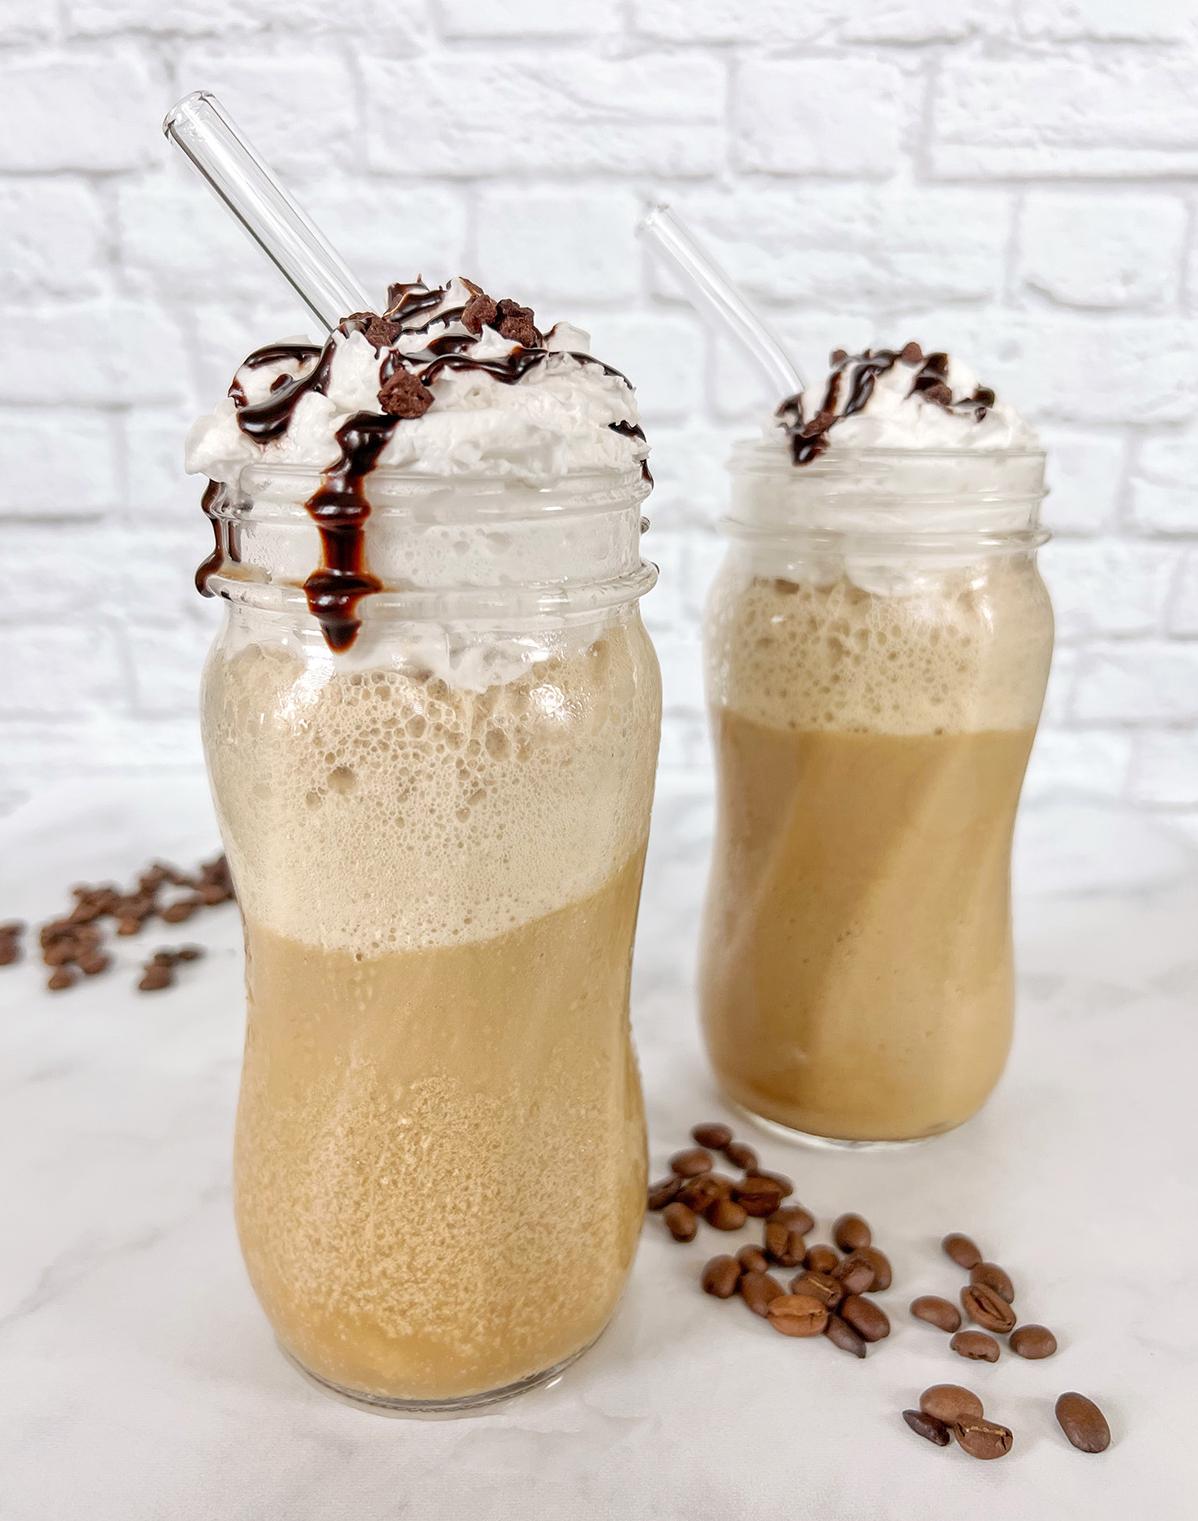  Cool off with this delicious vegan blended iced coffee!